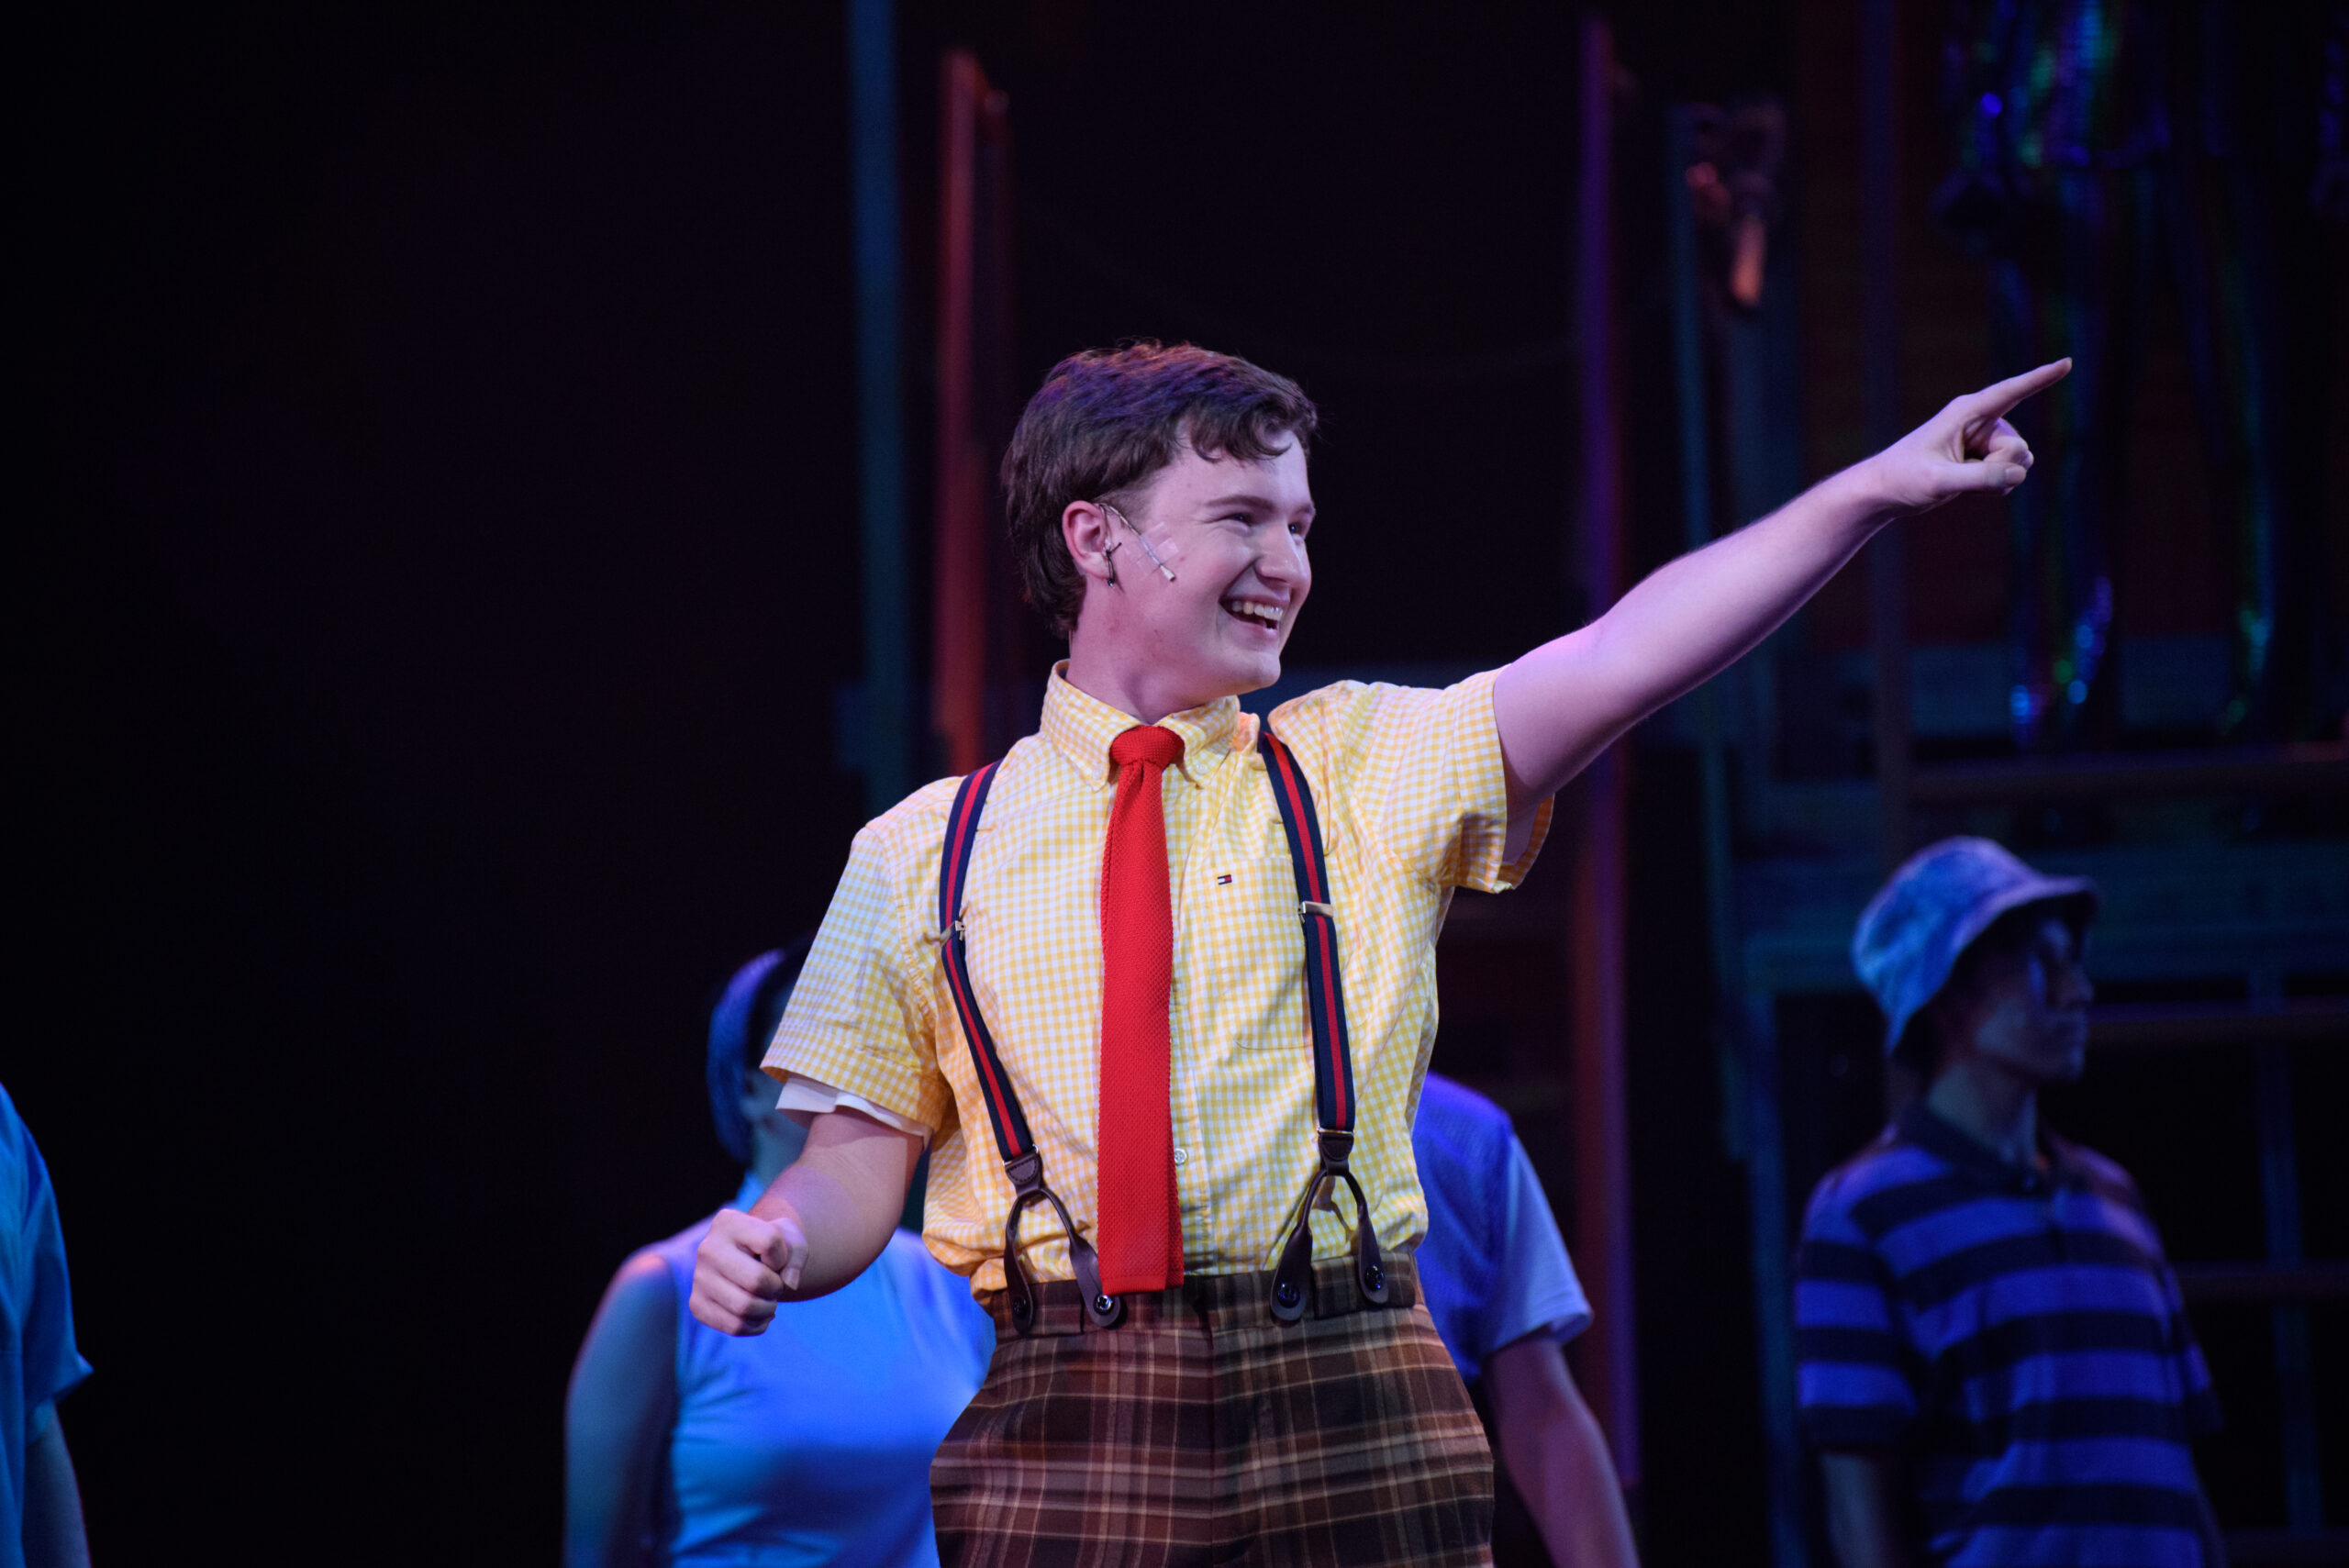 Ethan-W.-Doyle-is-SpongegBob-in-VYT_s-The-SpongeBob-Musical-photo-credit-Jenny-Kaufman-XPosed-Capture